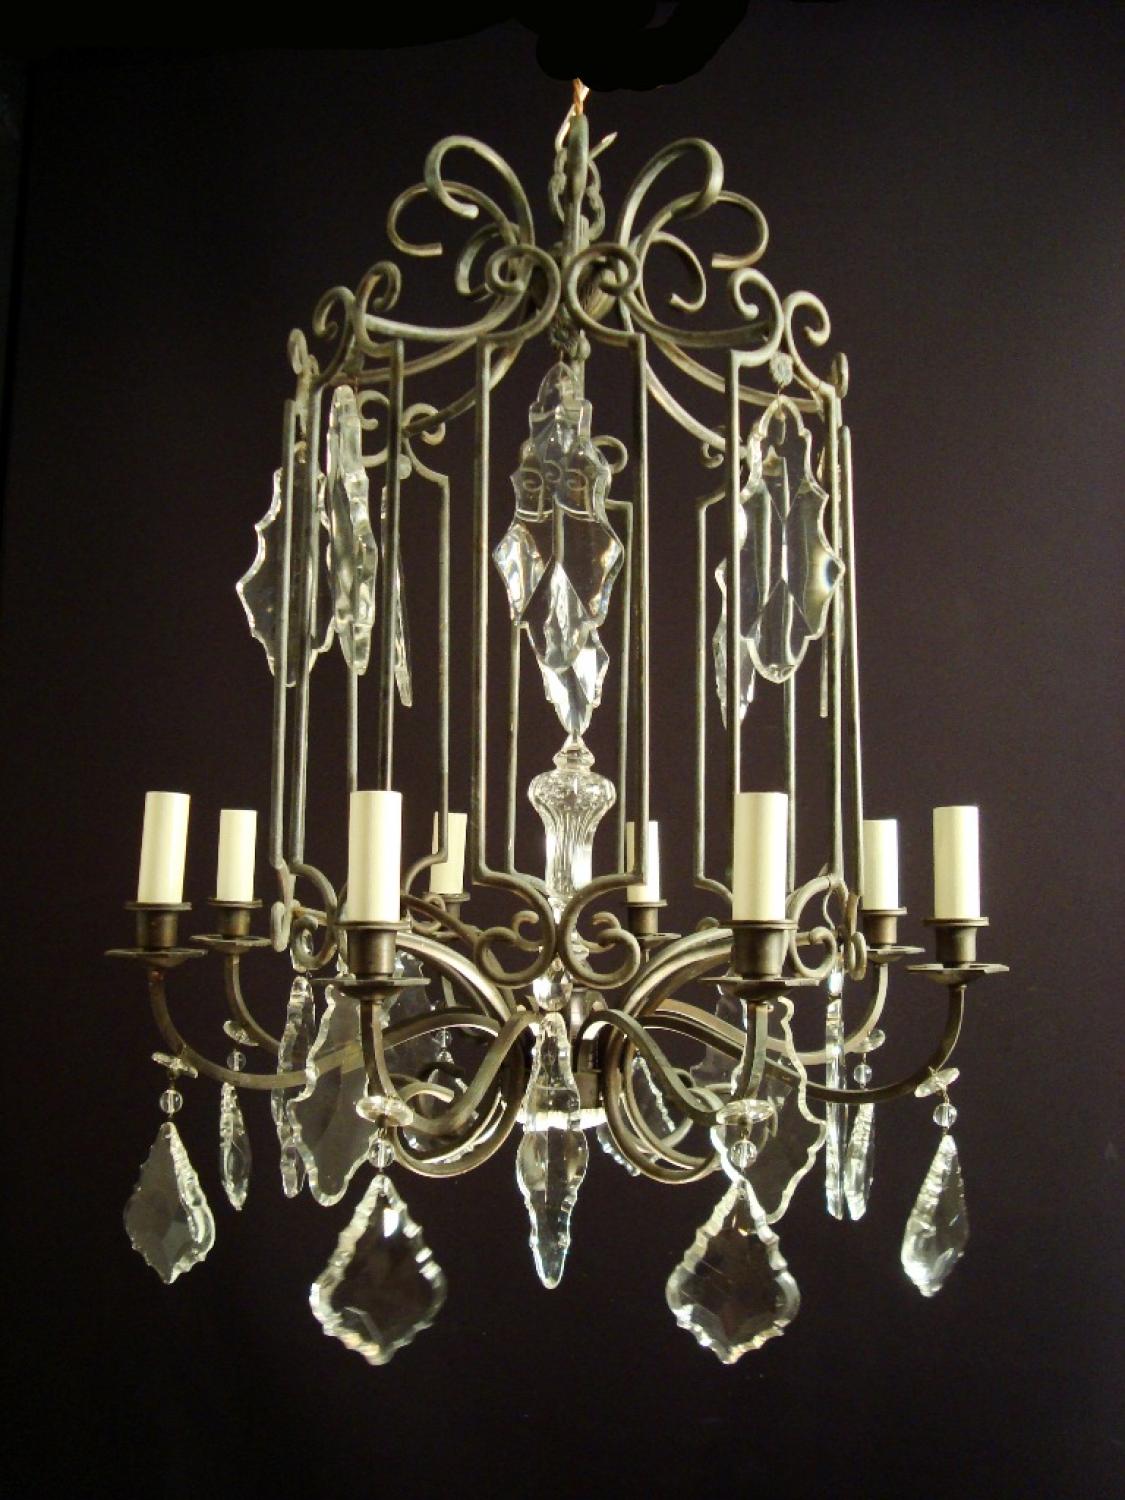 An unusual black patinated brass chandelier